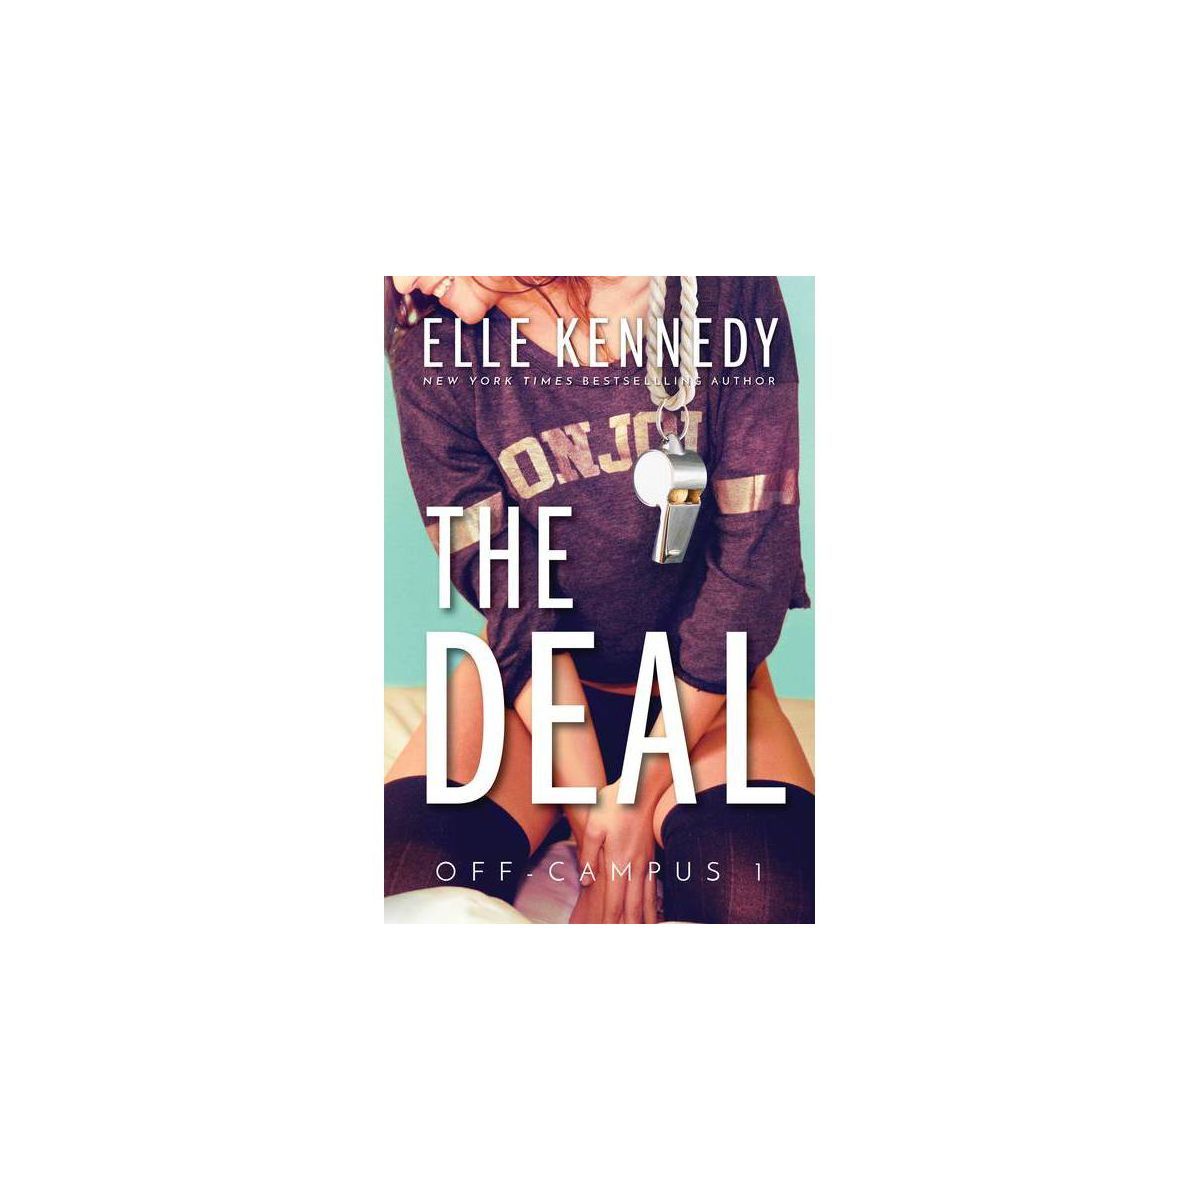 The Deal - (Off-Campus) by Elle Kennedy (Paperback) | Target